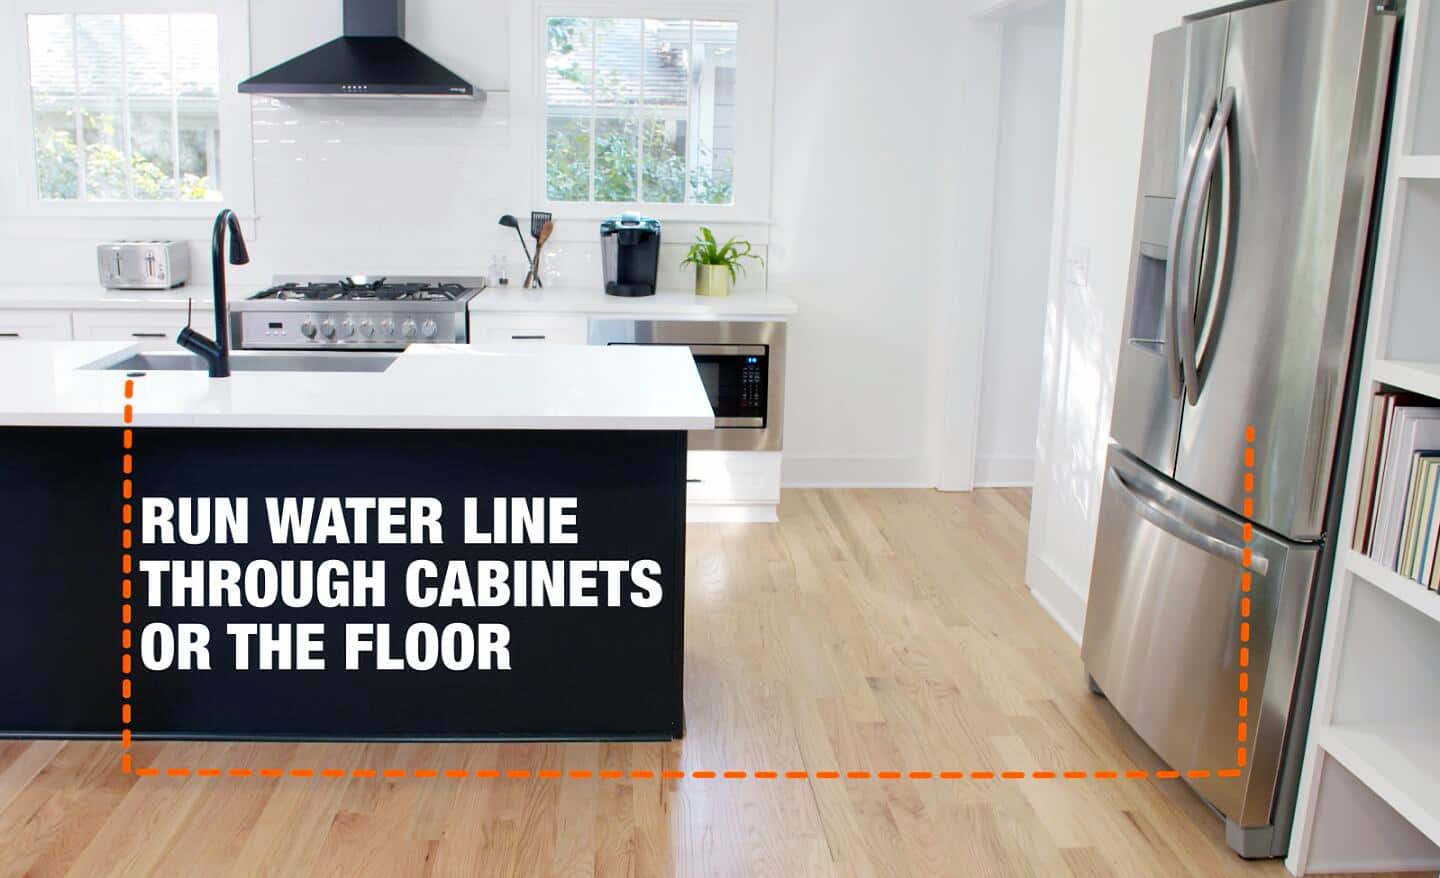 A kitchen showing the path of a water line from the sink to the refrigerator.